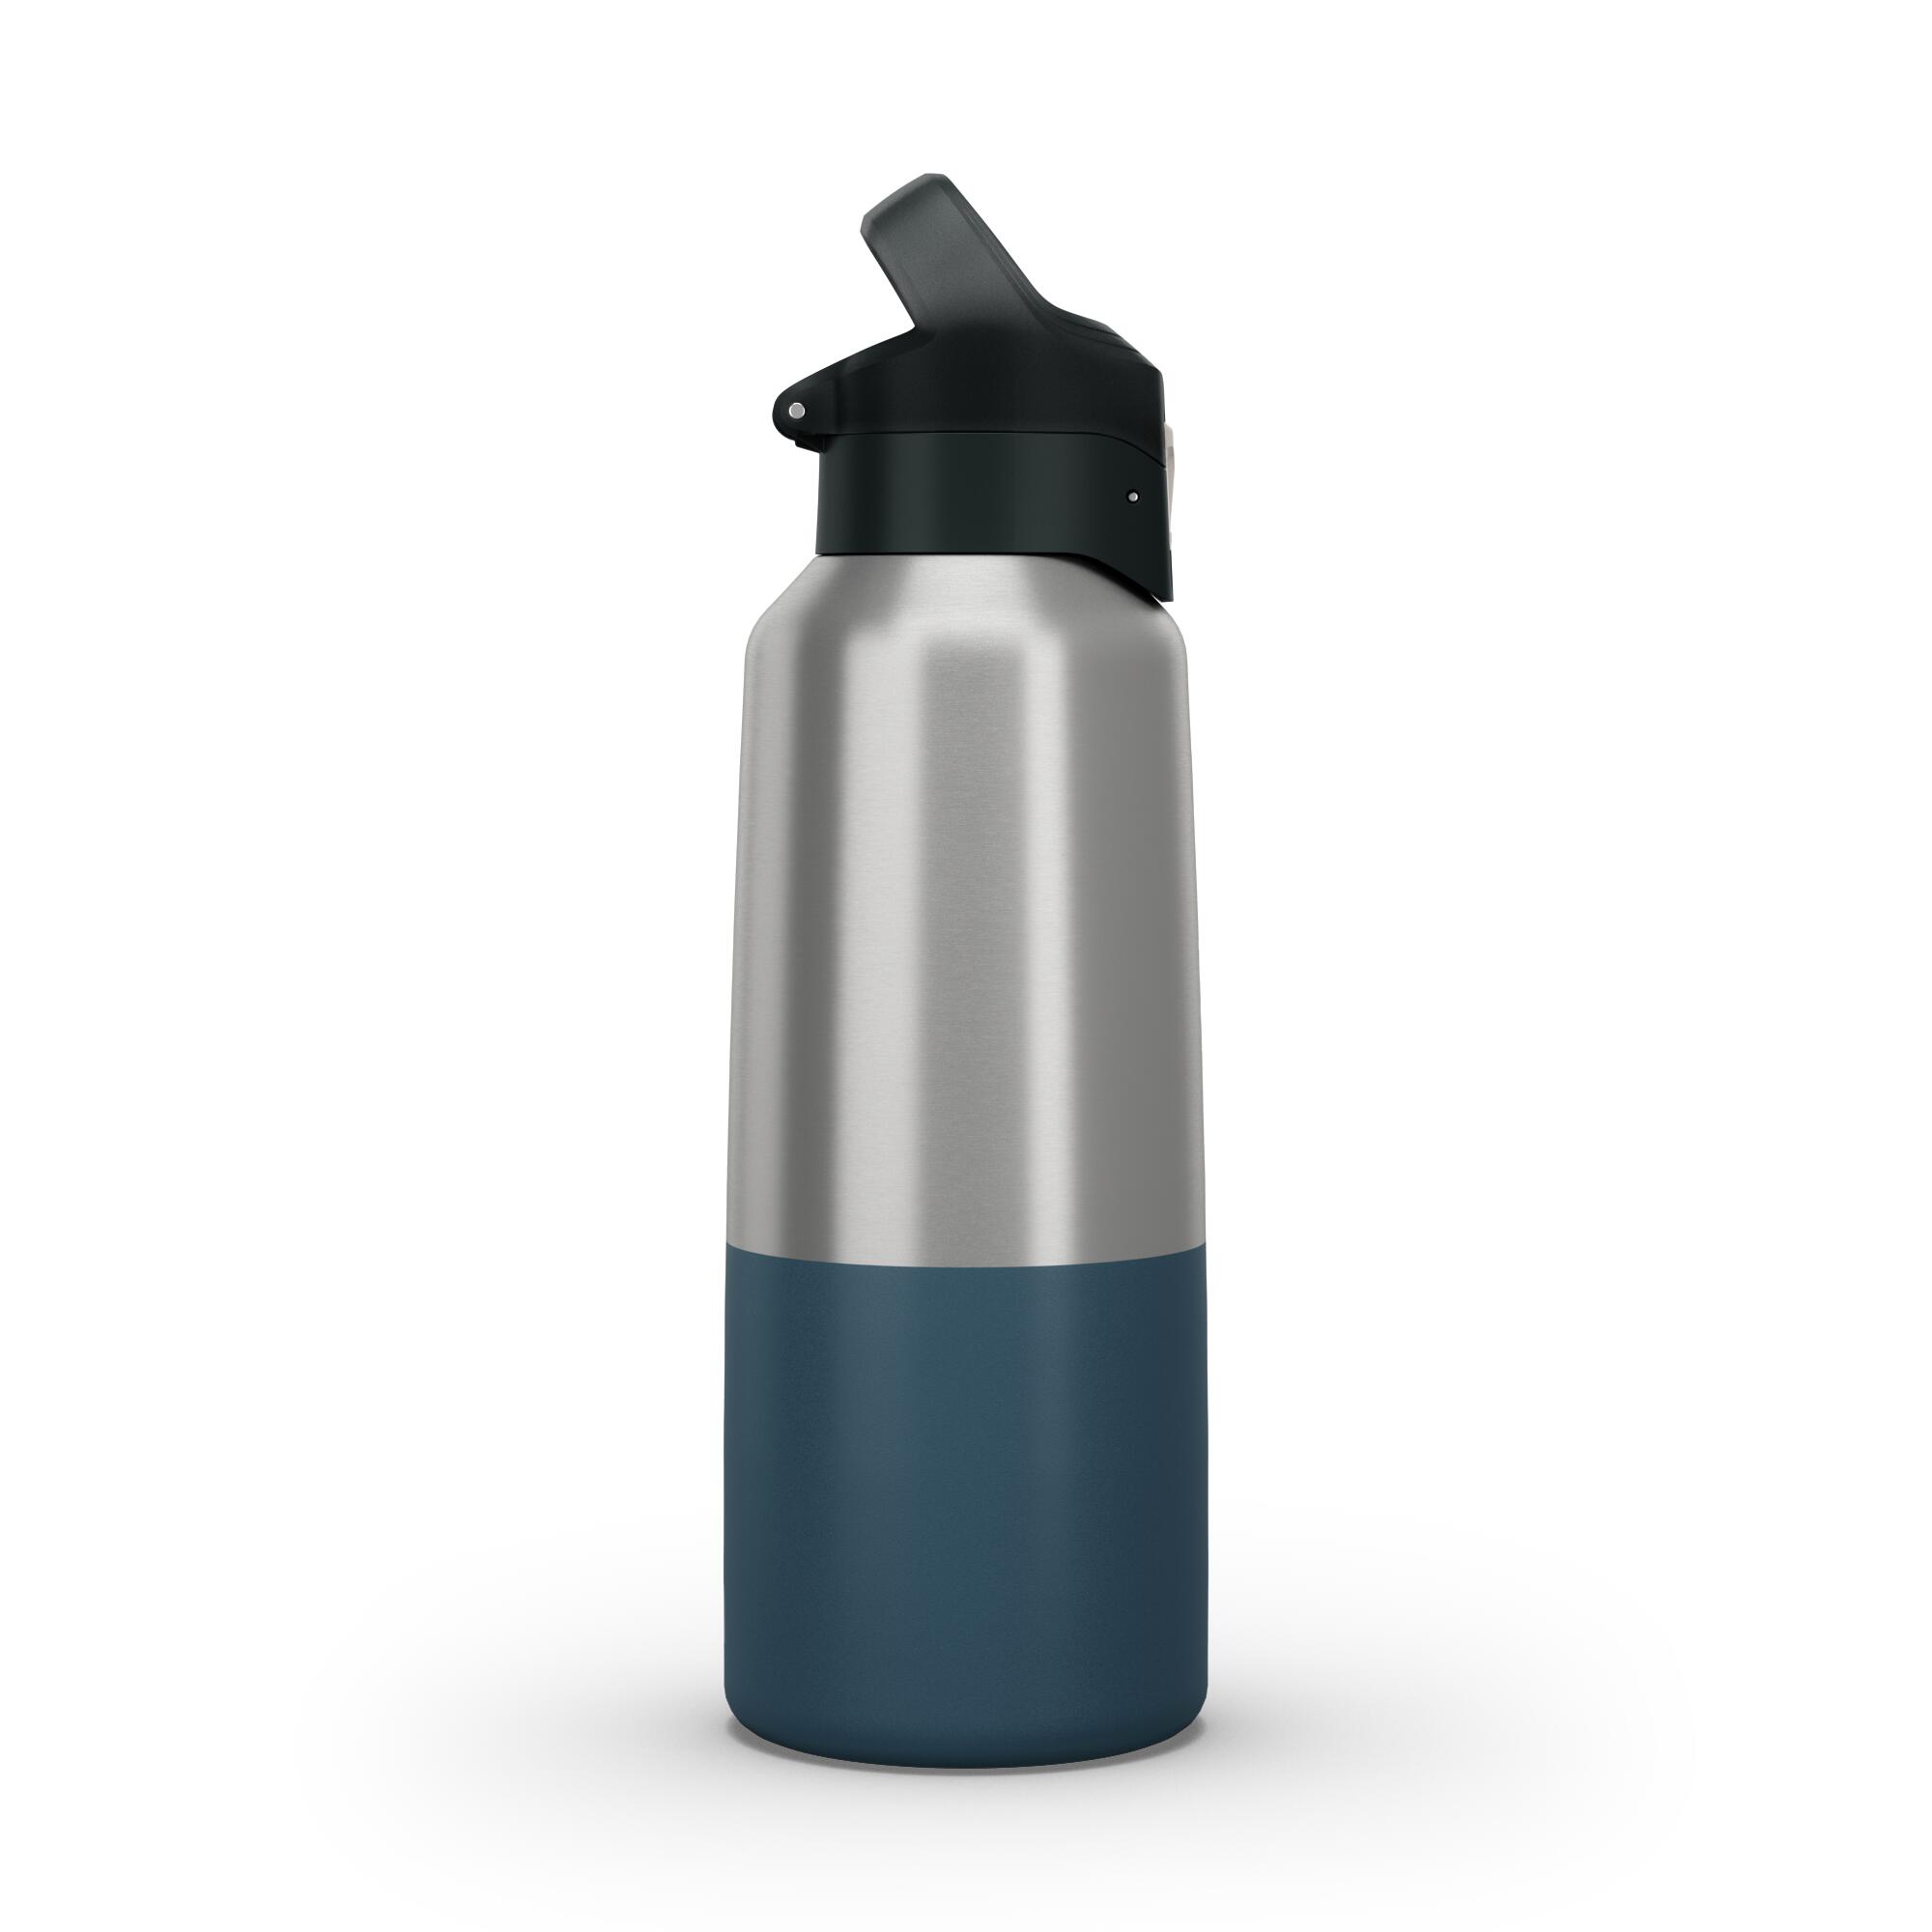 0.8 L stainless steel isothermal water bottle with quick-release cap for hiking  17/31